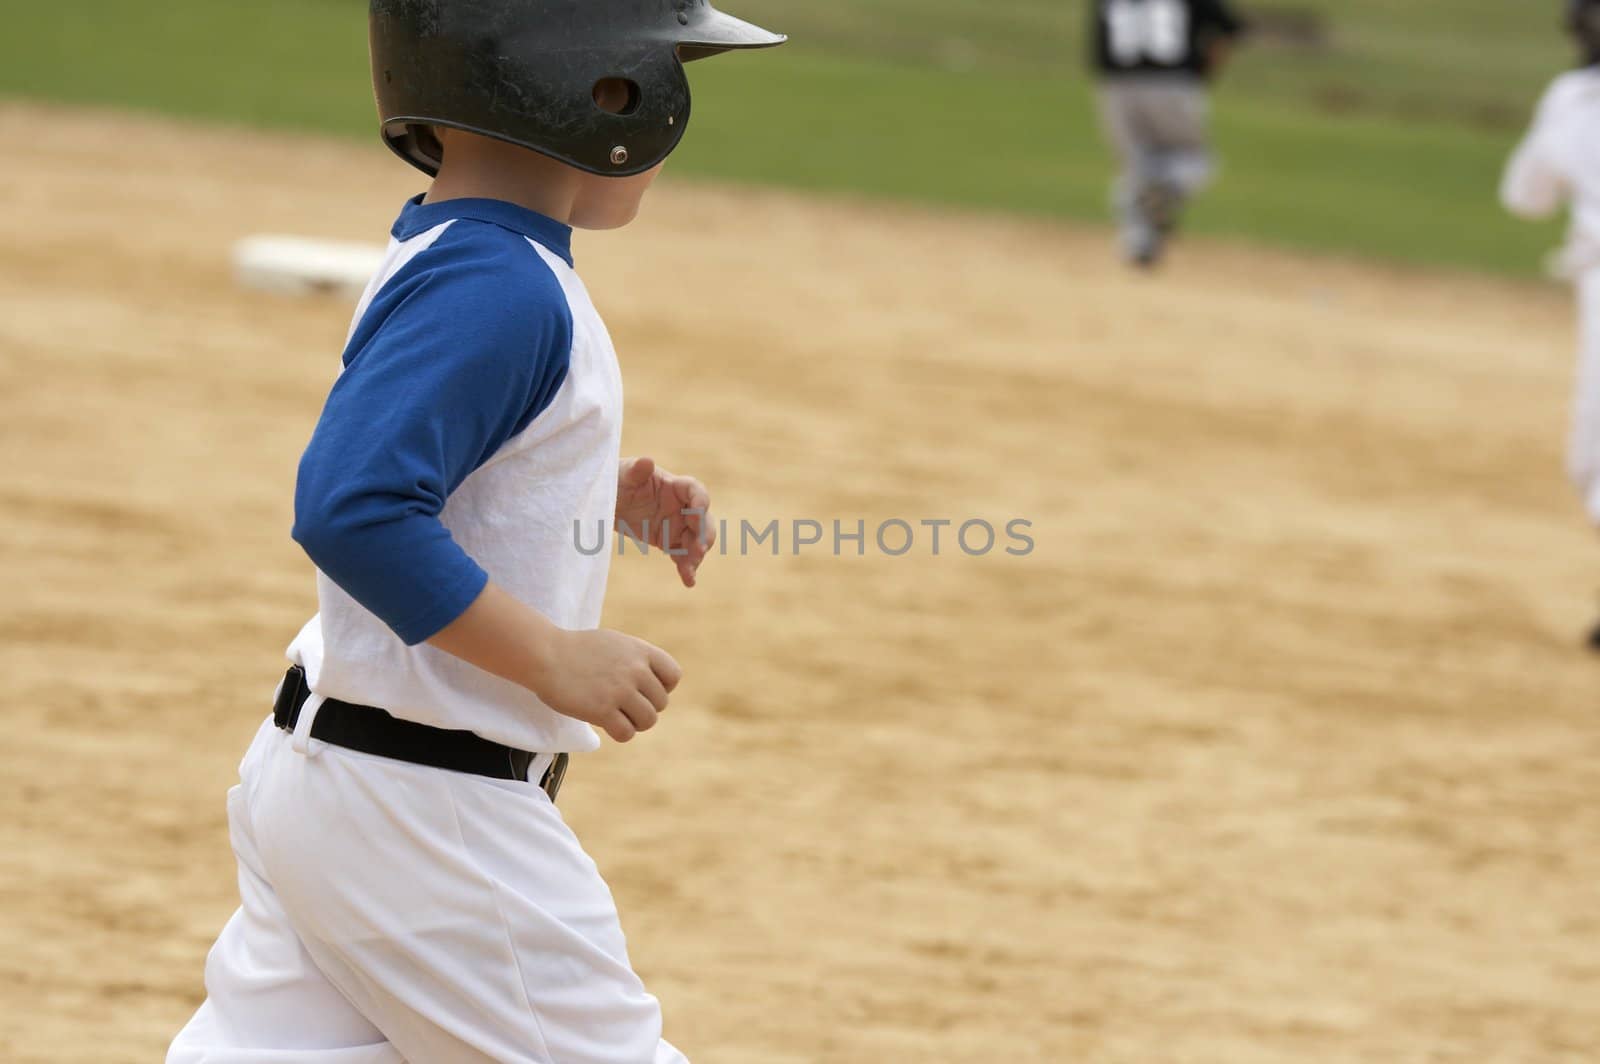 a baseball player running the bases after hitting